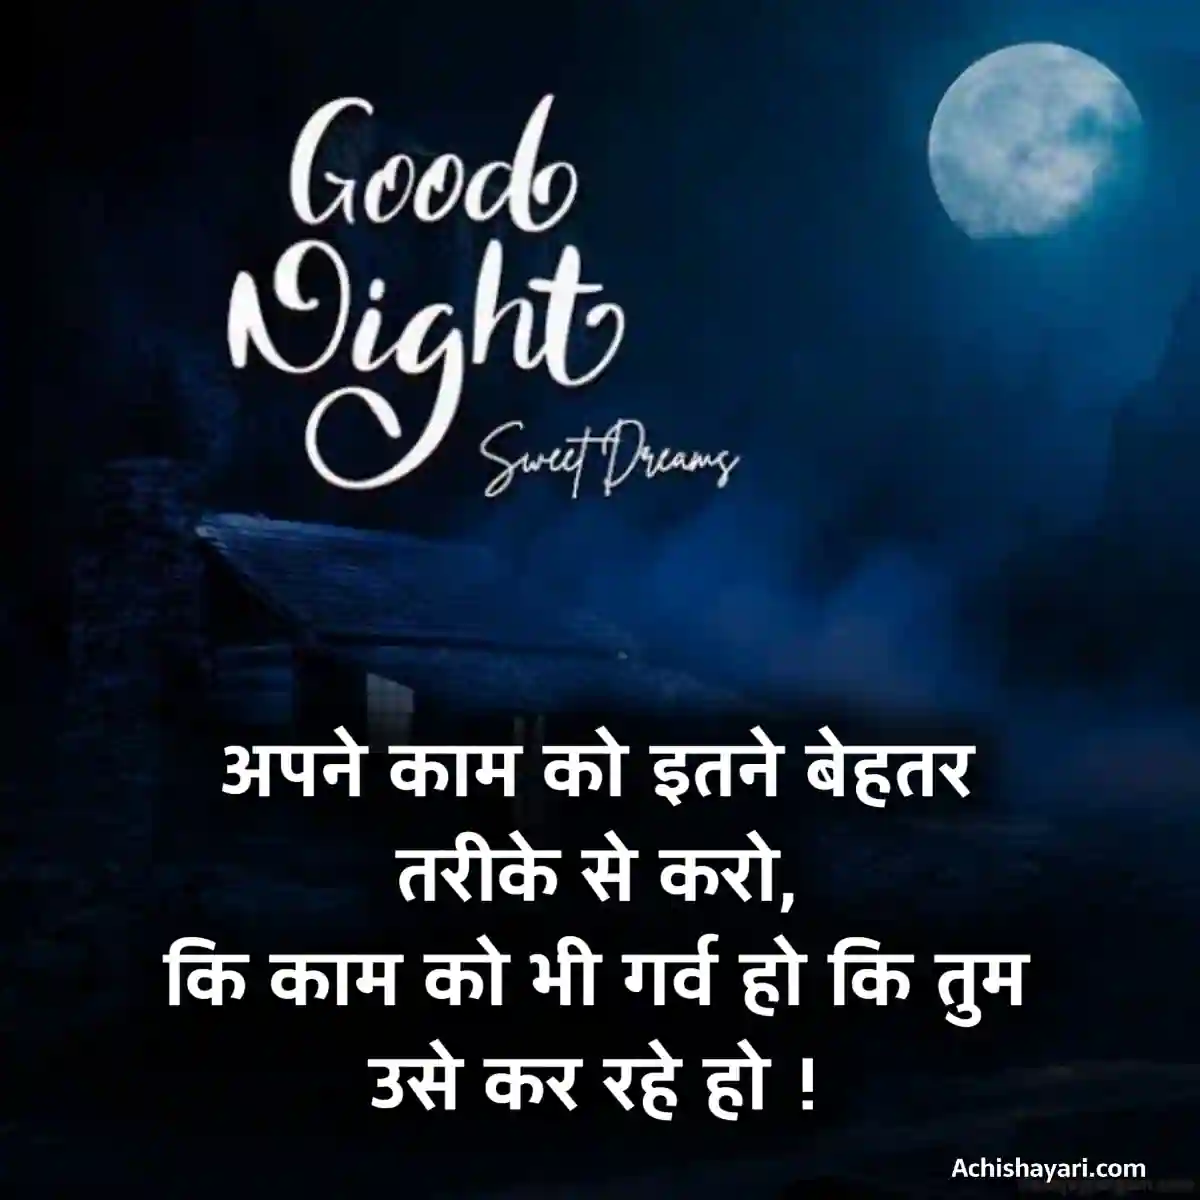 Incredible Compilation: Over 999+ Good Night Images in Hindi – Complete 4K Collection of Good Night Images in Hindi